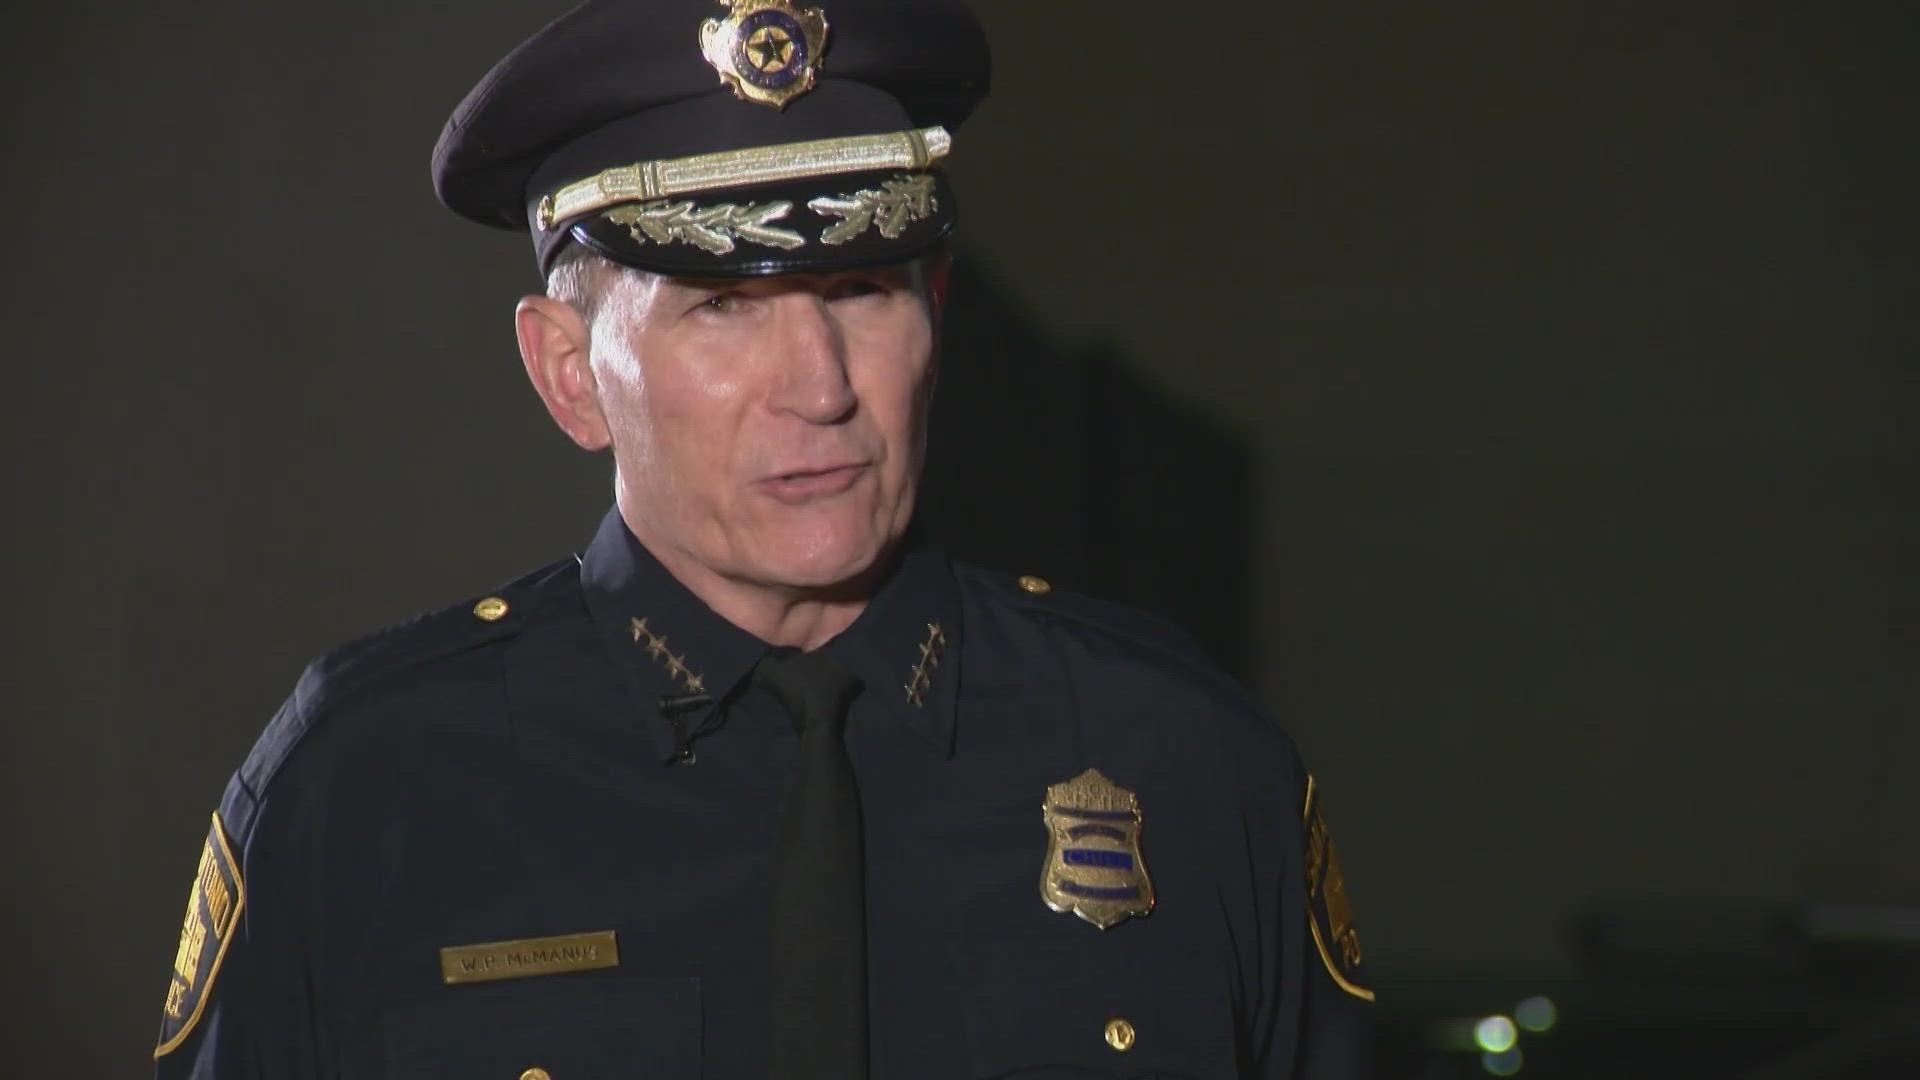 "It's the definition of 'arrogance of authority,'" SAPD chief William McManus told KENS 5. "It was the opposite of the way things should be done."